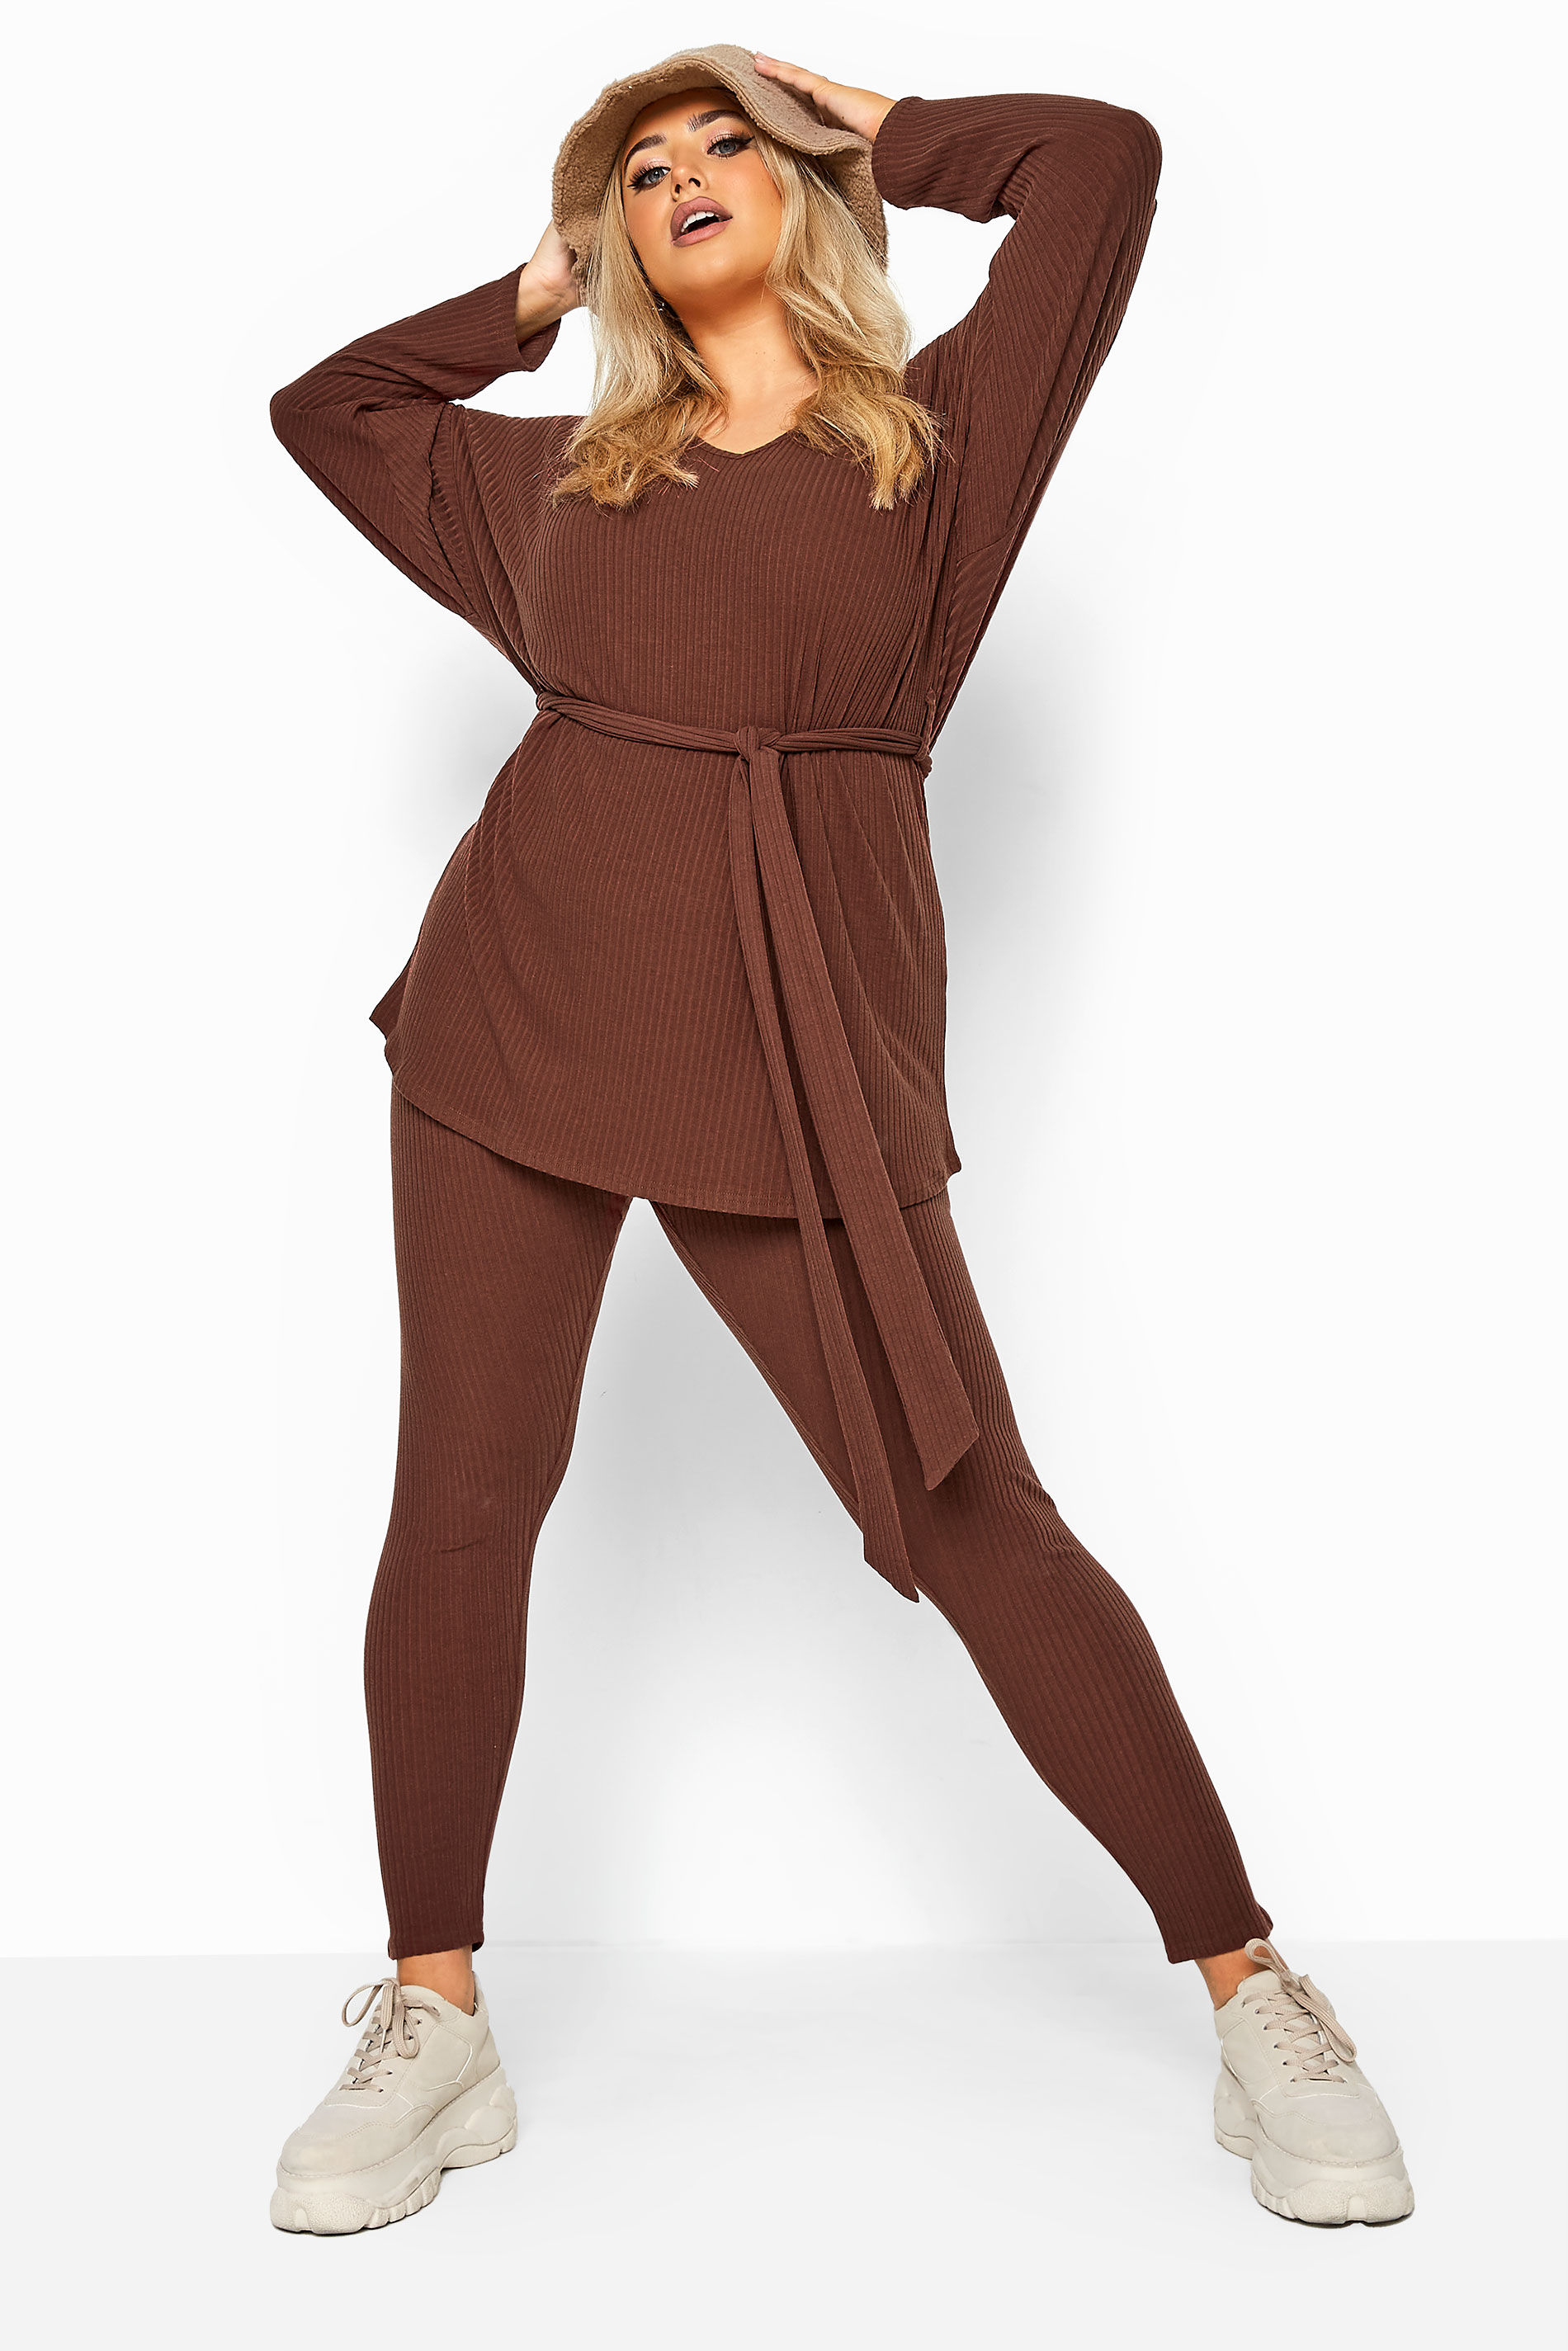 Chocolate Brown Crinkle Cut Out Hip Leggings Co-ord – Boho Rose Collection